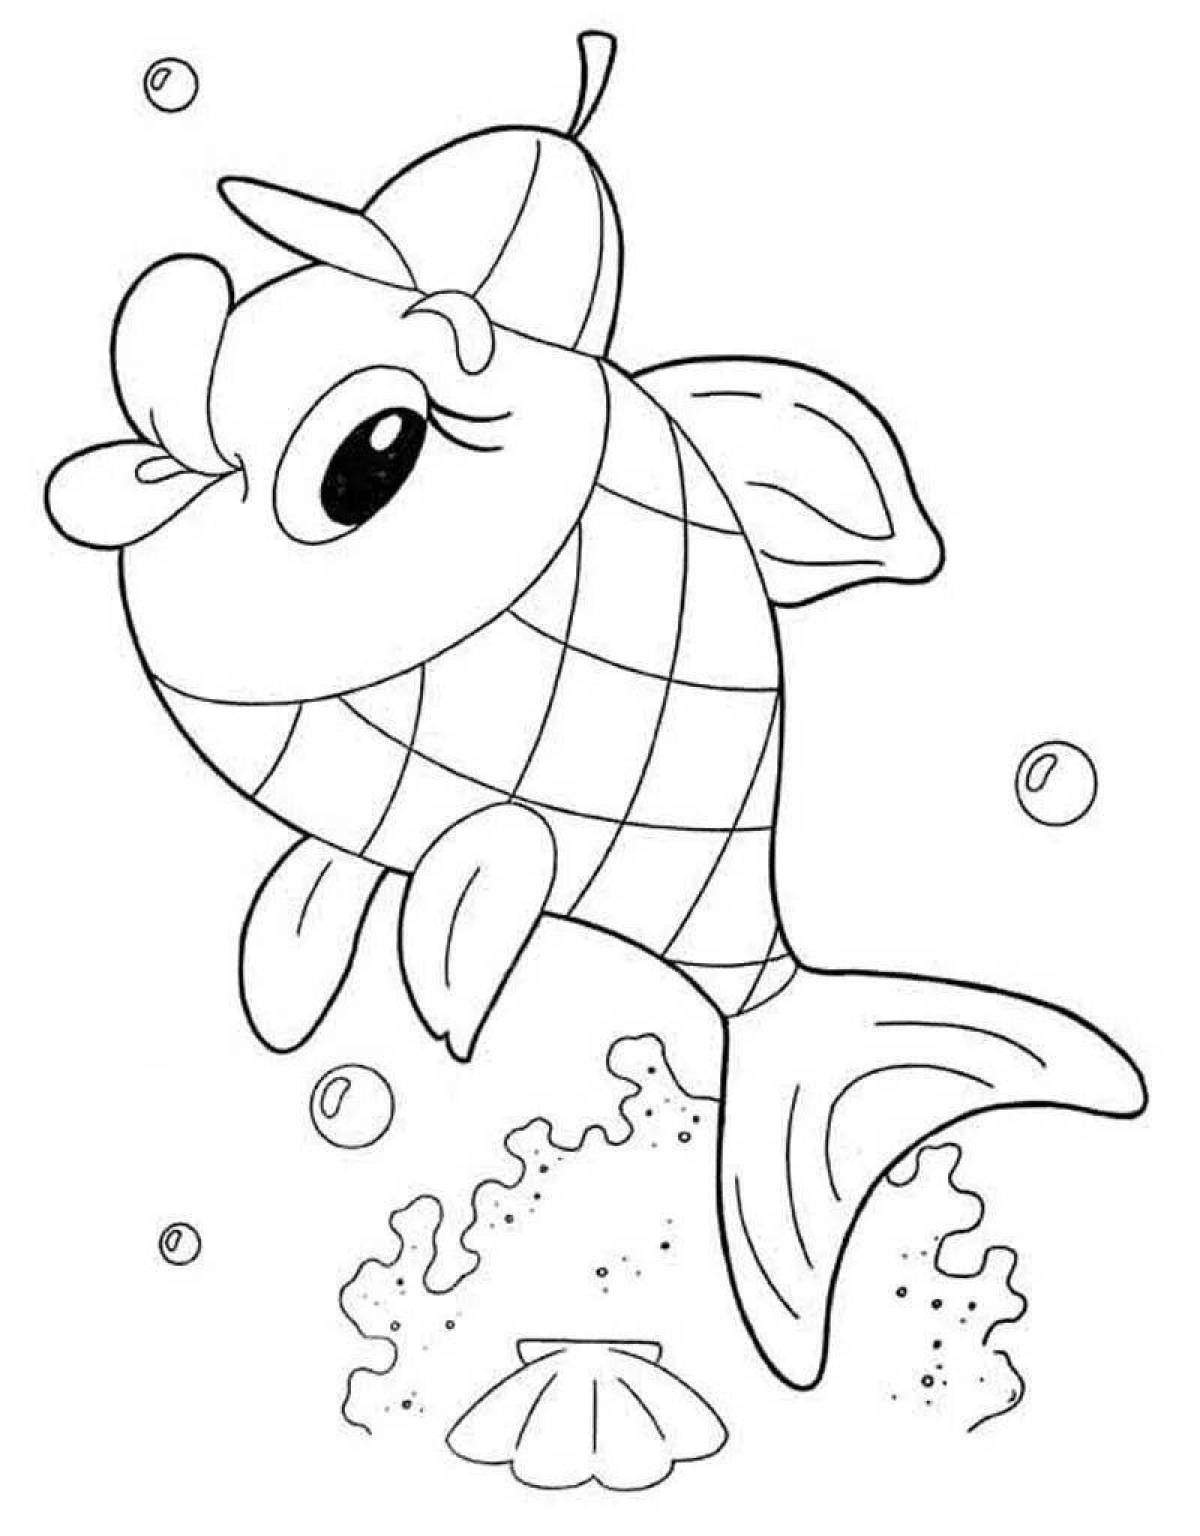 Sparkling fish coloring book for kids